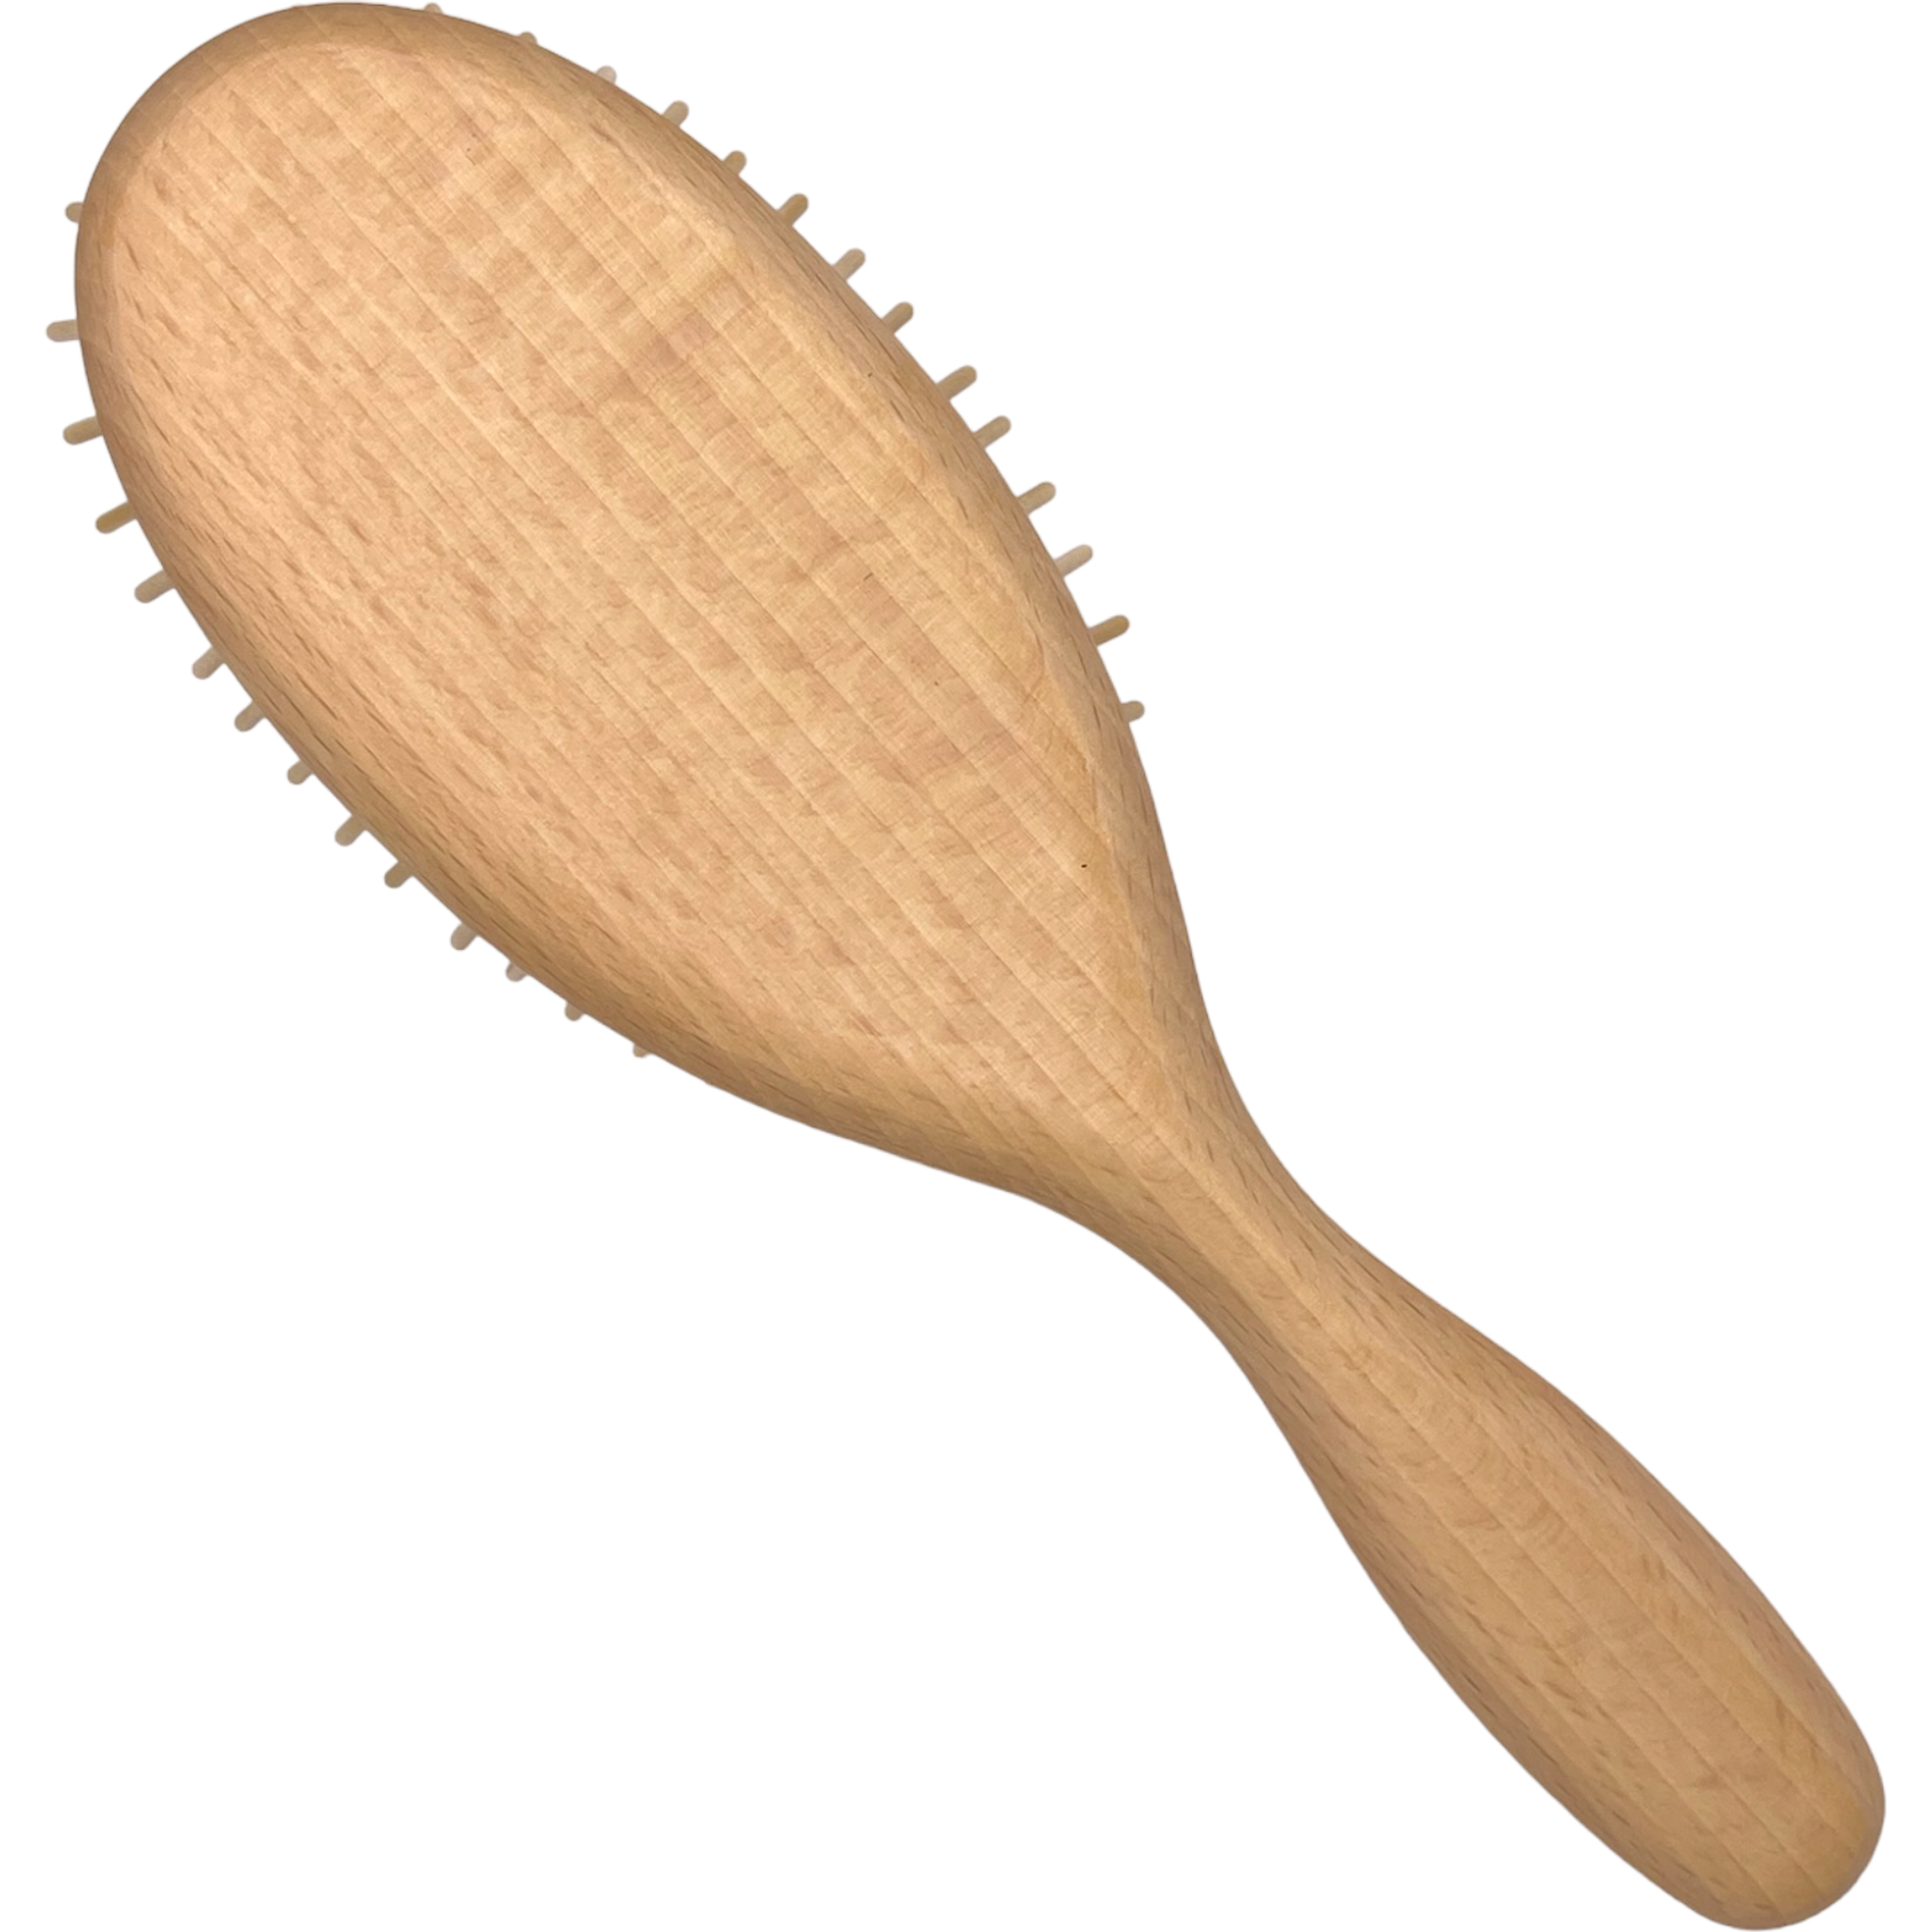 Dural Cushion Brush with Extra Long Wooden Pins